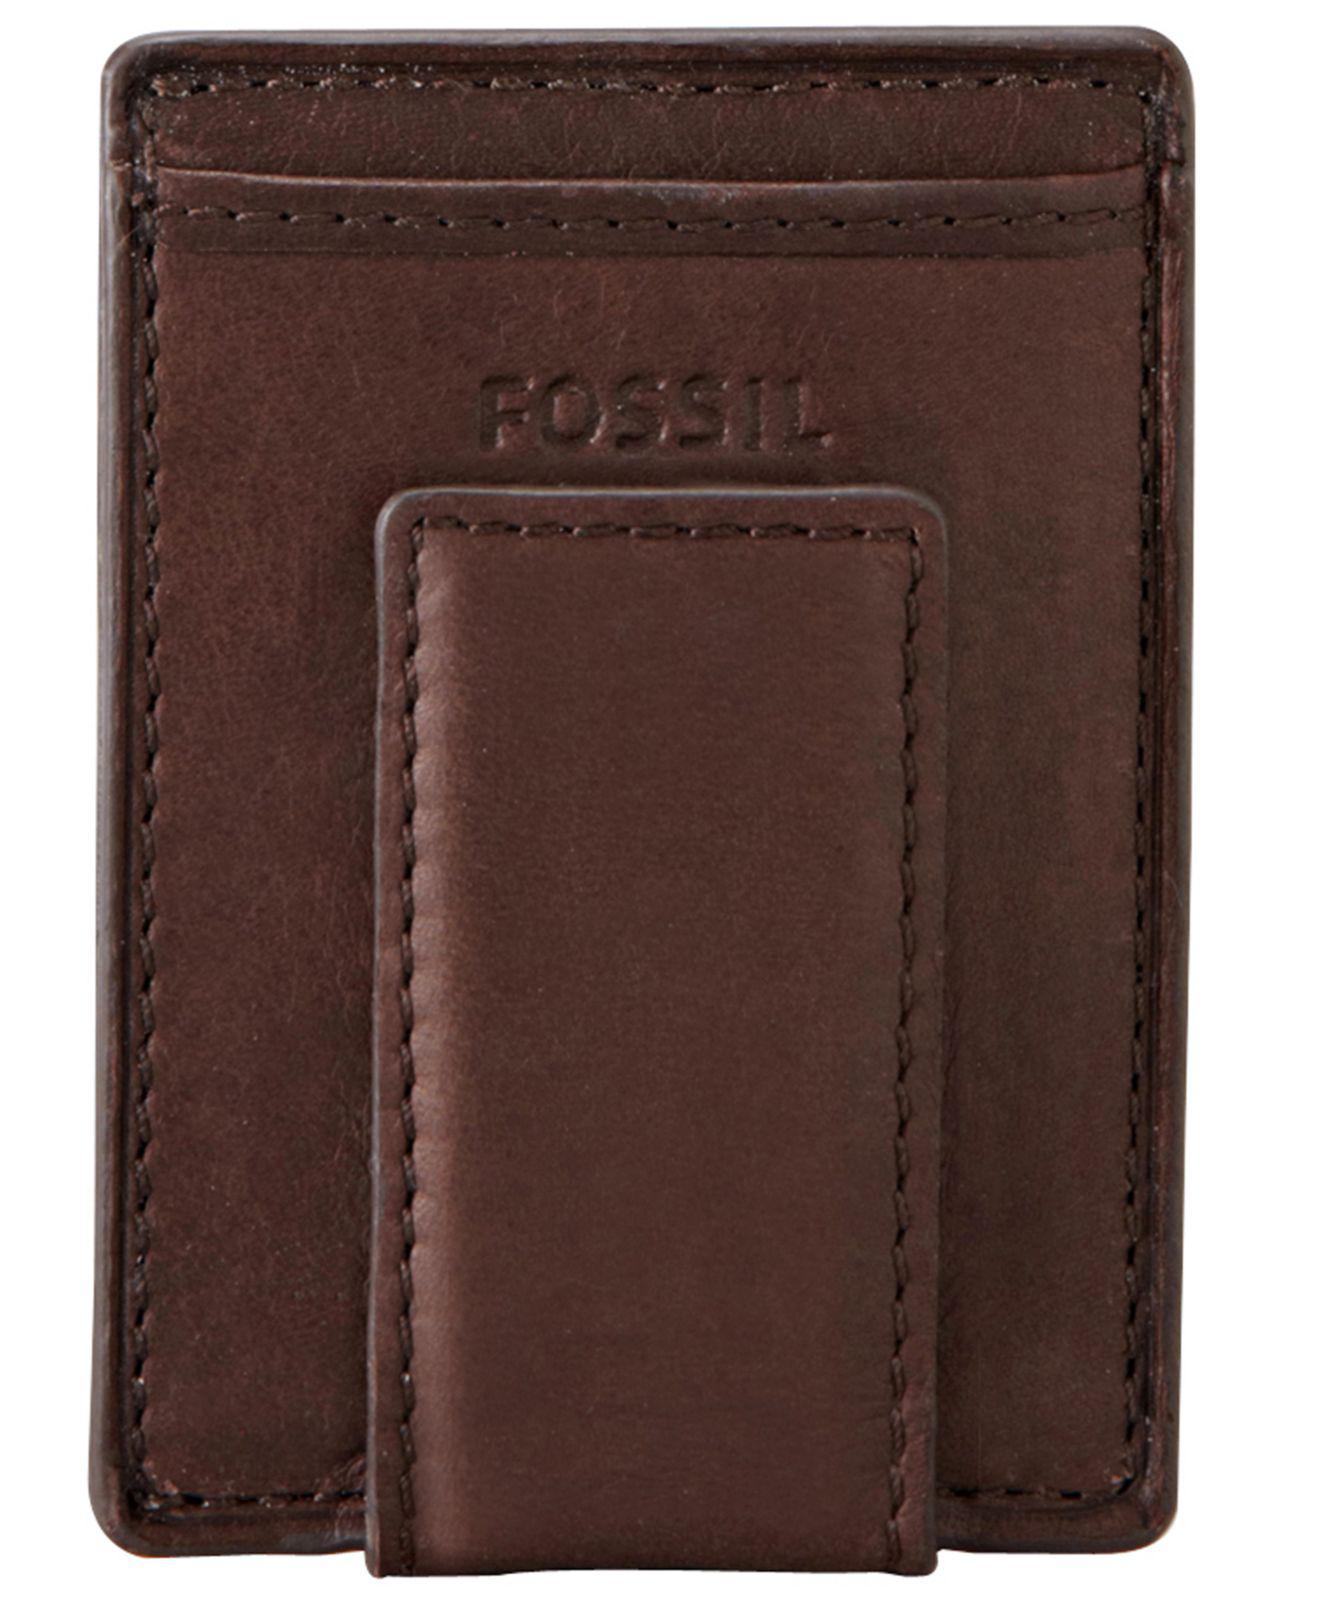 Fossil Leather Wallets Ingram Magnetic Multicard Wallet In Brown For